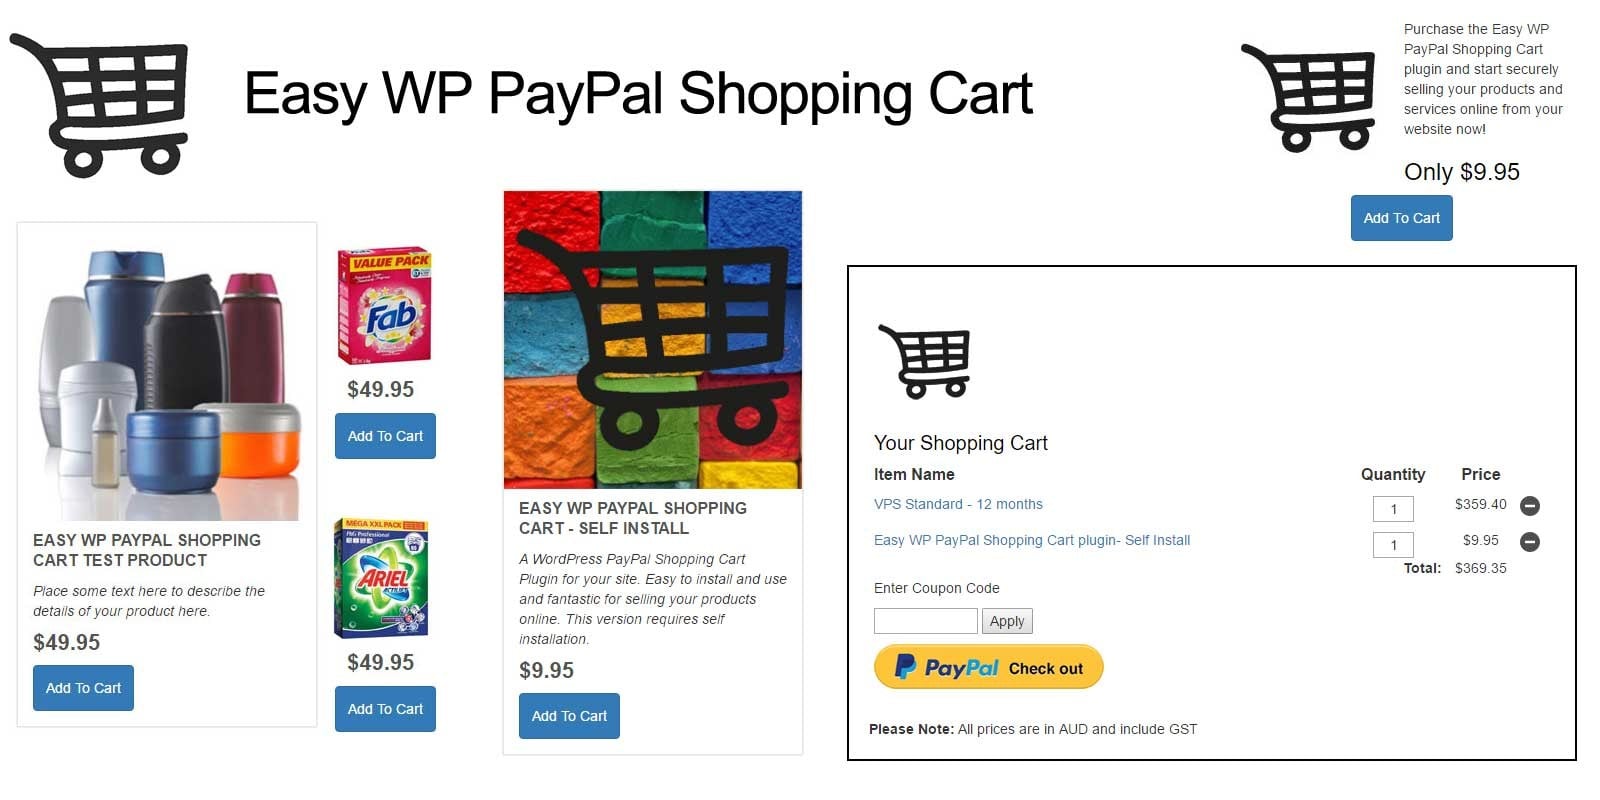 Shopping cart software is the best option among other ecommerce website technology if you already have a website and want to add a product catalog and process payments